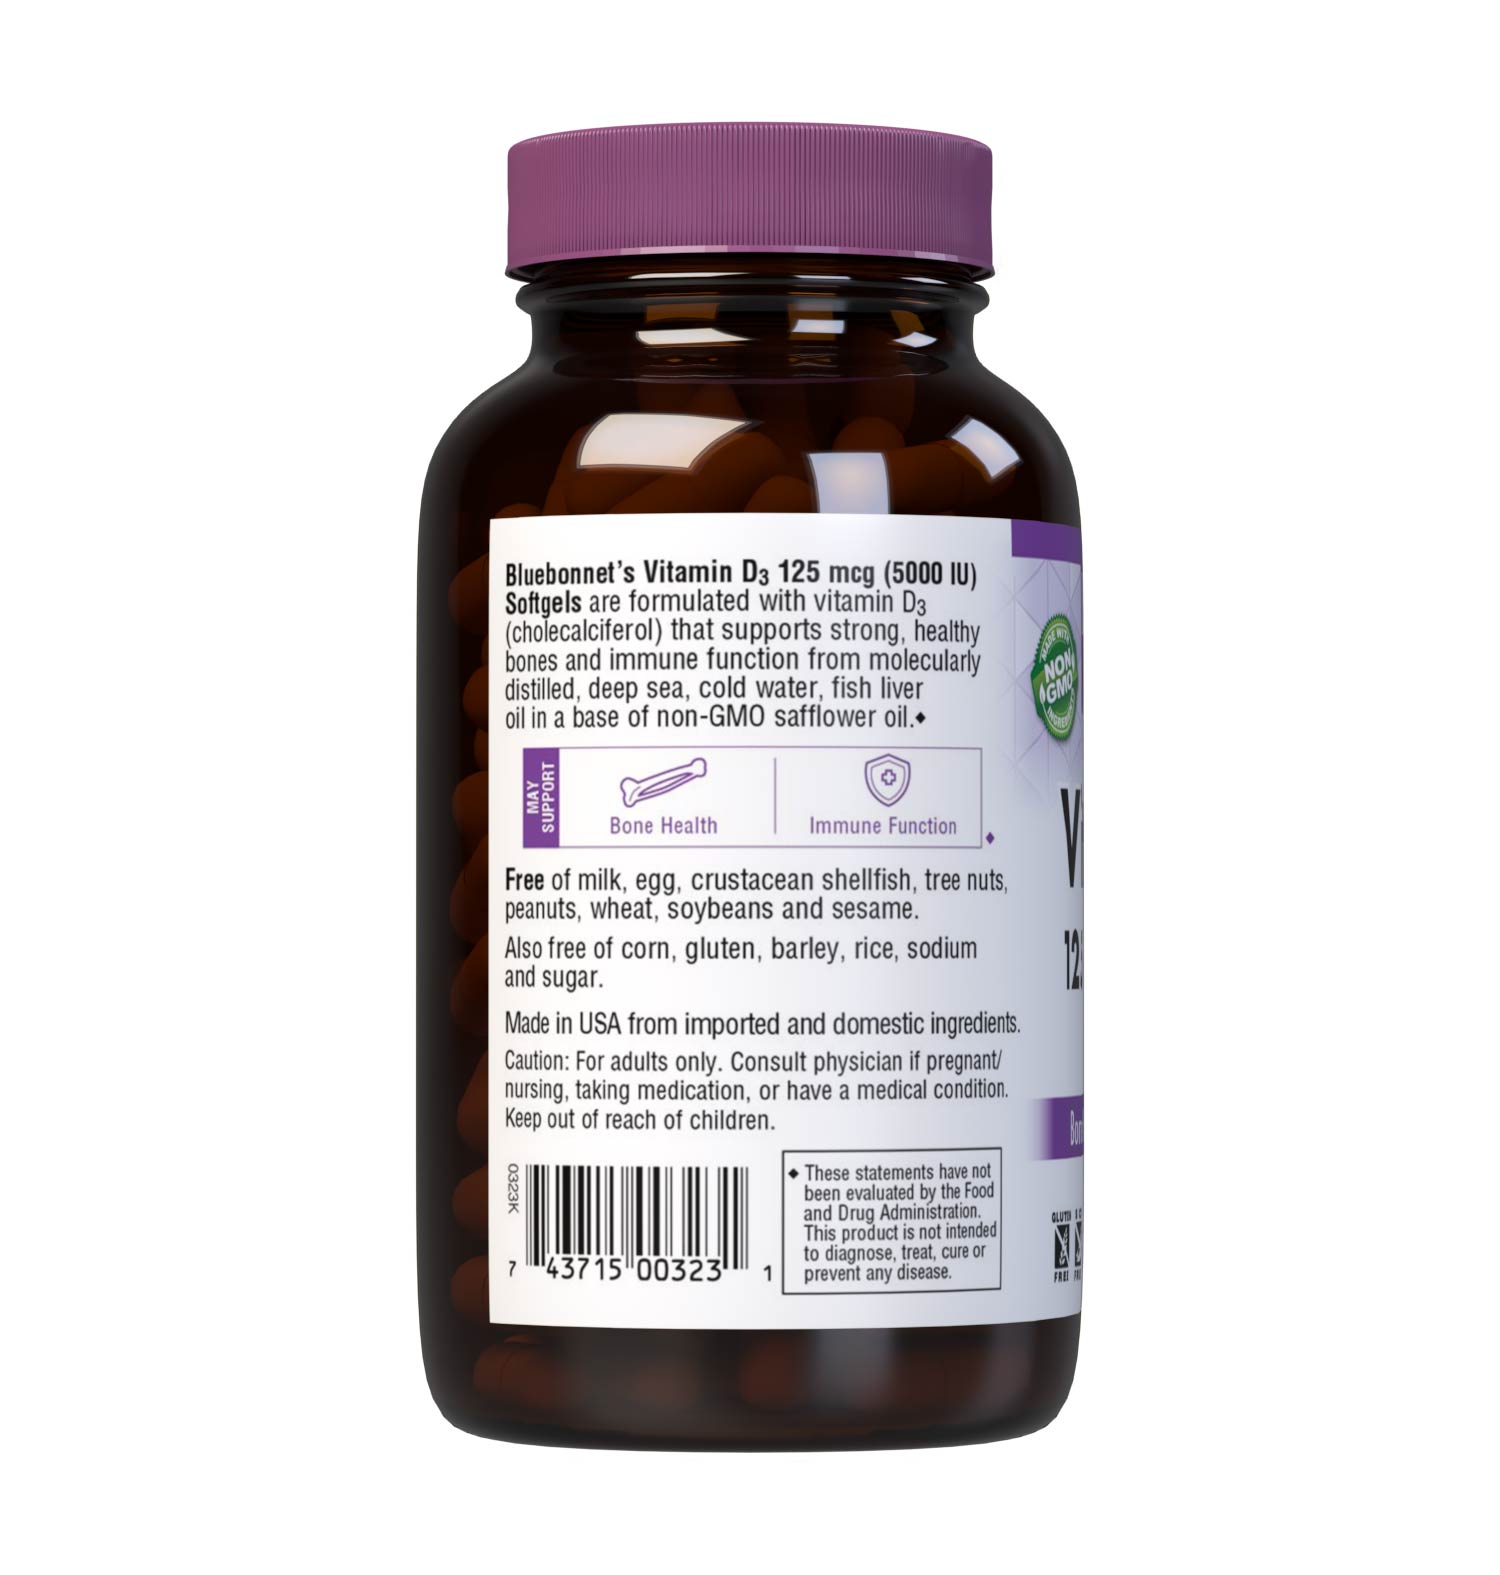 Bluebonnet’s Vitamin D3 125 mcg (5000 IU) 250 Softgels are formulated with vitamin D3 (cholecalciferol) that supports strong healthy bones and immune function from molecularly distilled, deep sea, cold water, fish liver oil in a base of non-GMO safflower oil. Description panel. #size_250 count